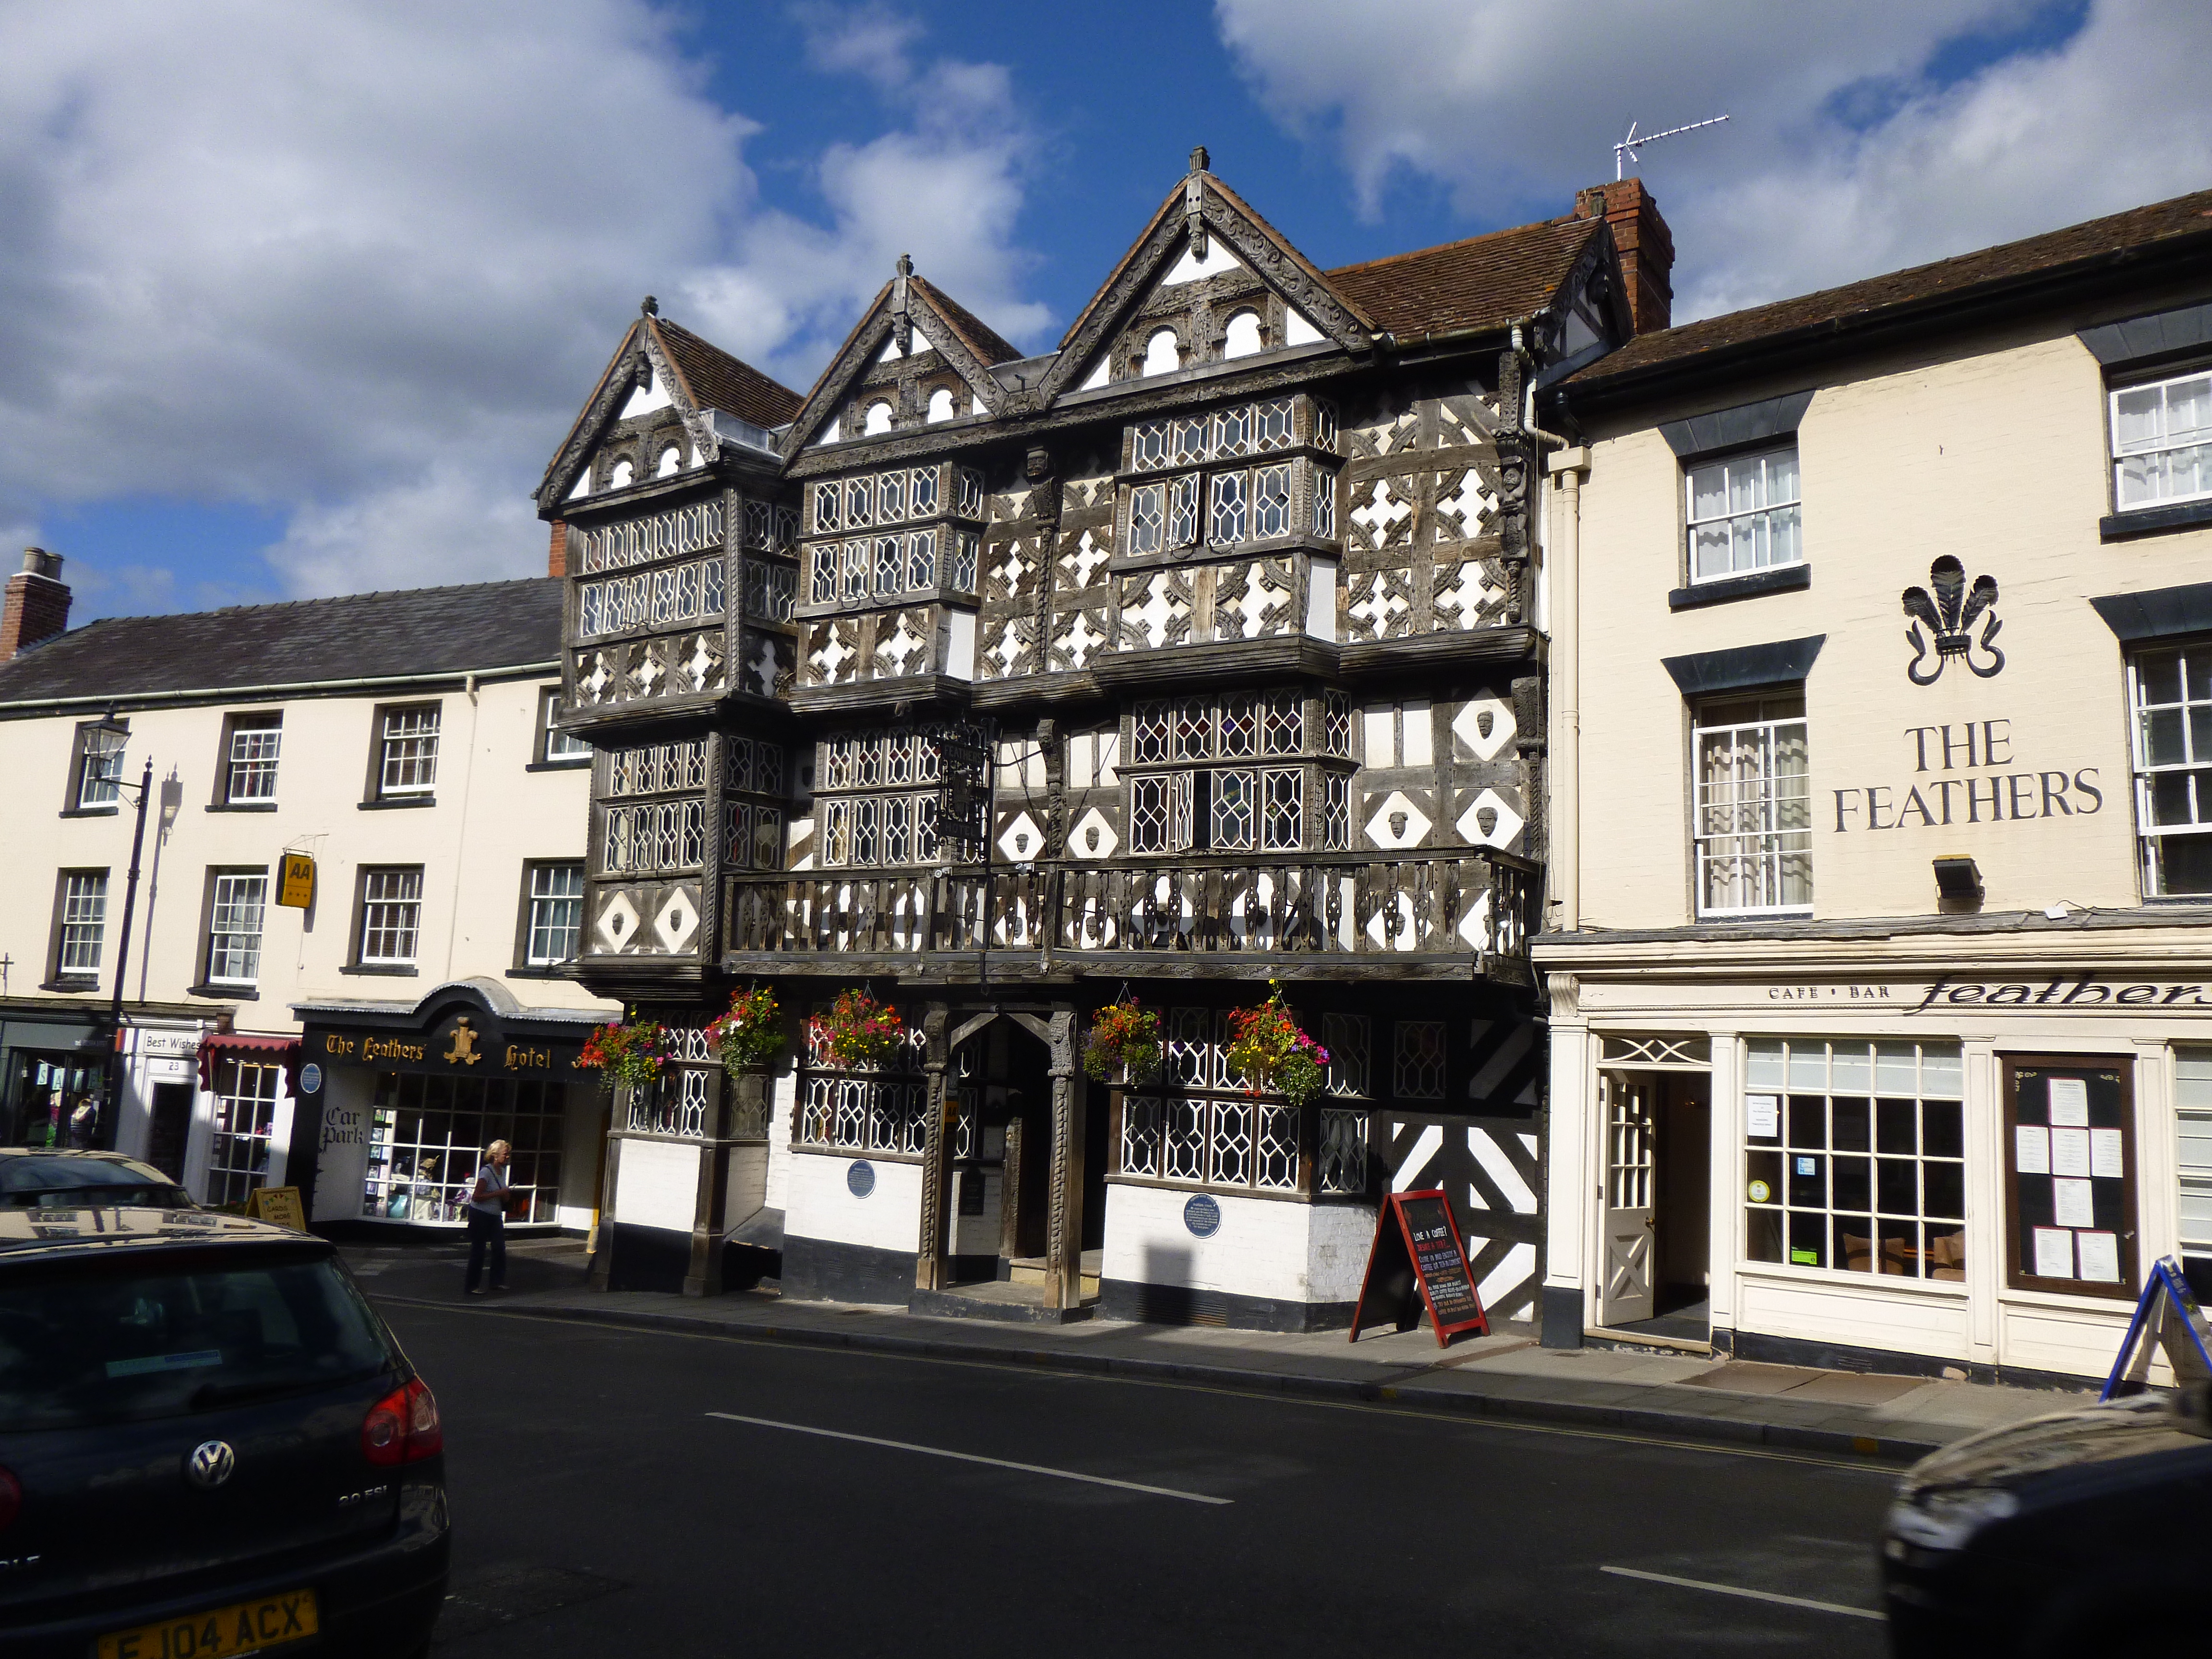 The Feathers in Ludlow